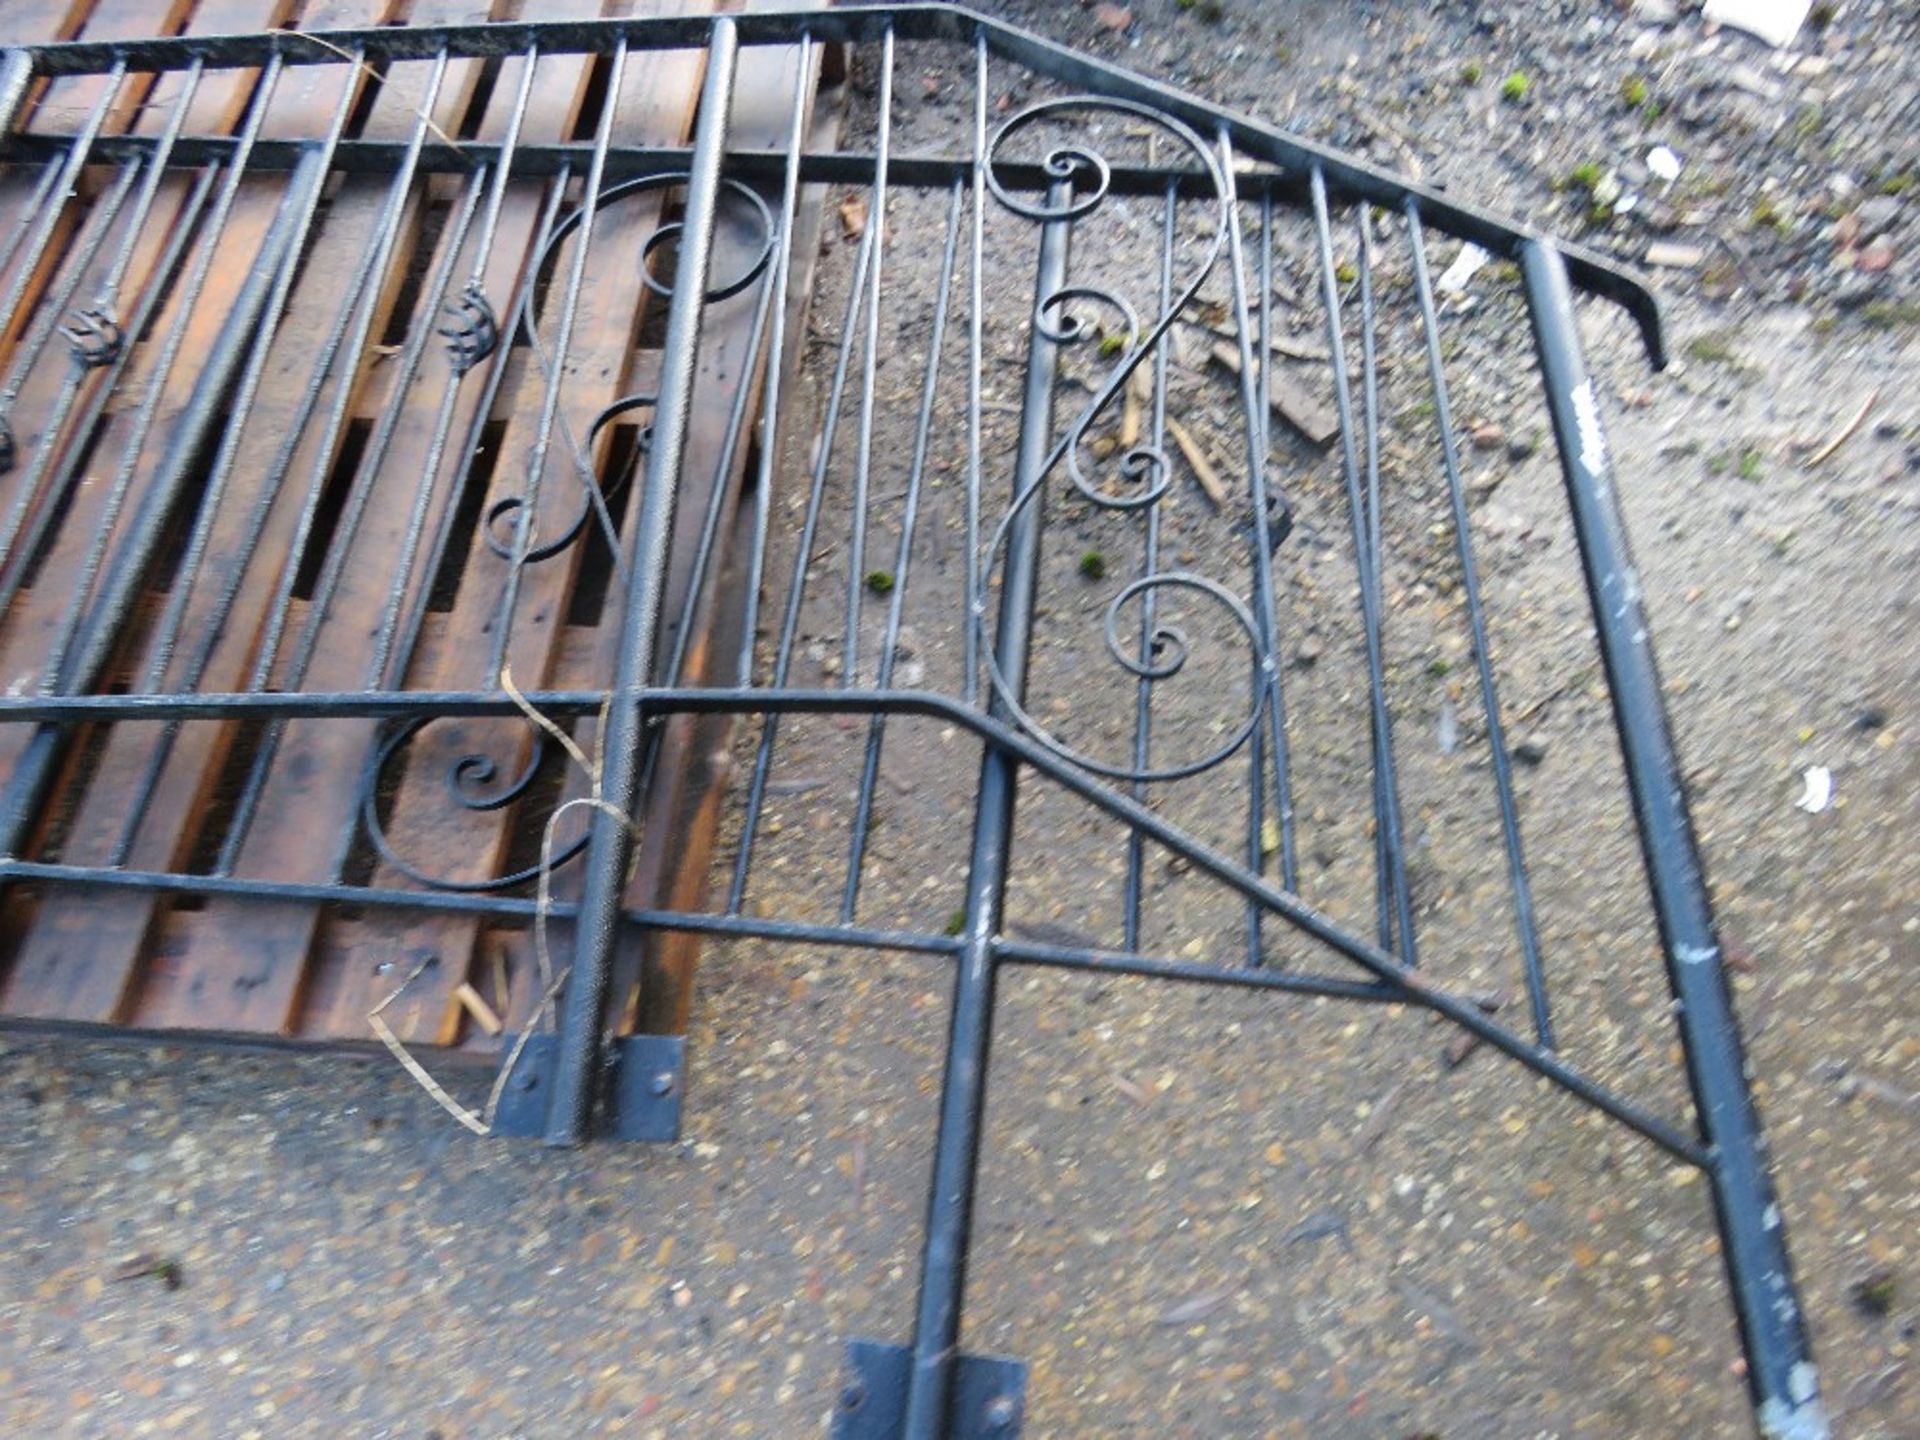 2 X DECORATIVE METAL BALLISTRADE STAIR RAILS, CIRCA 9FT LENGTH EACH This items is being item sold - Image 2 of 3